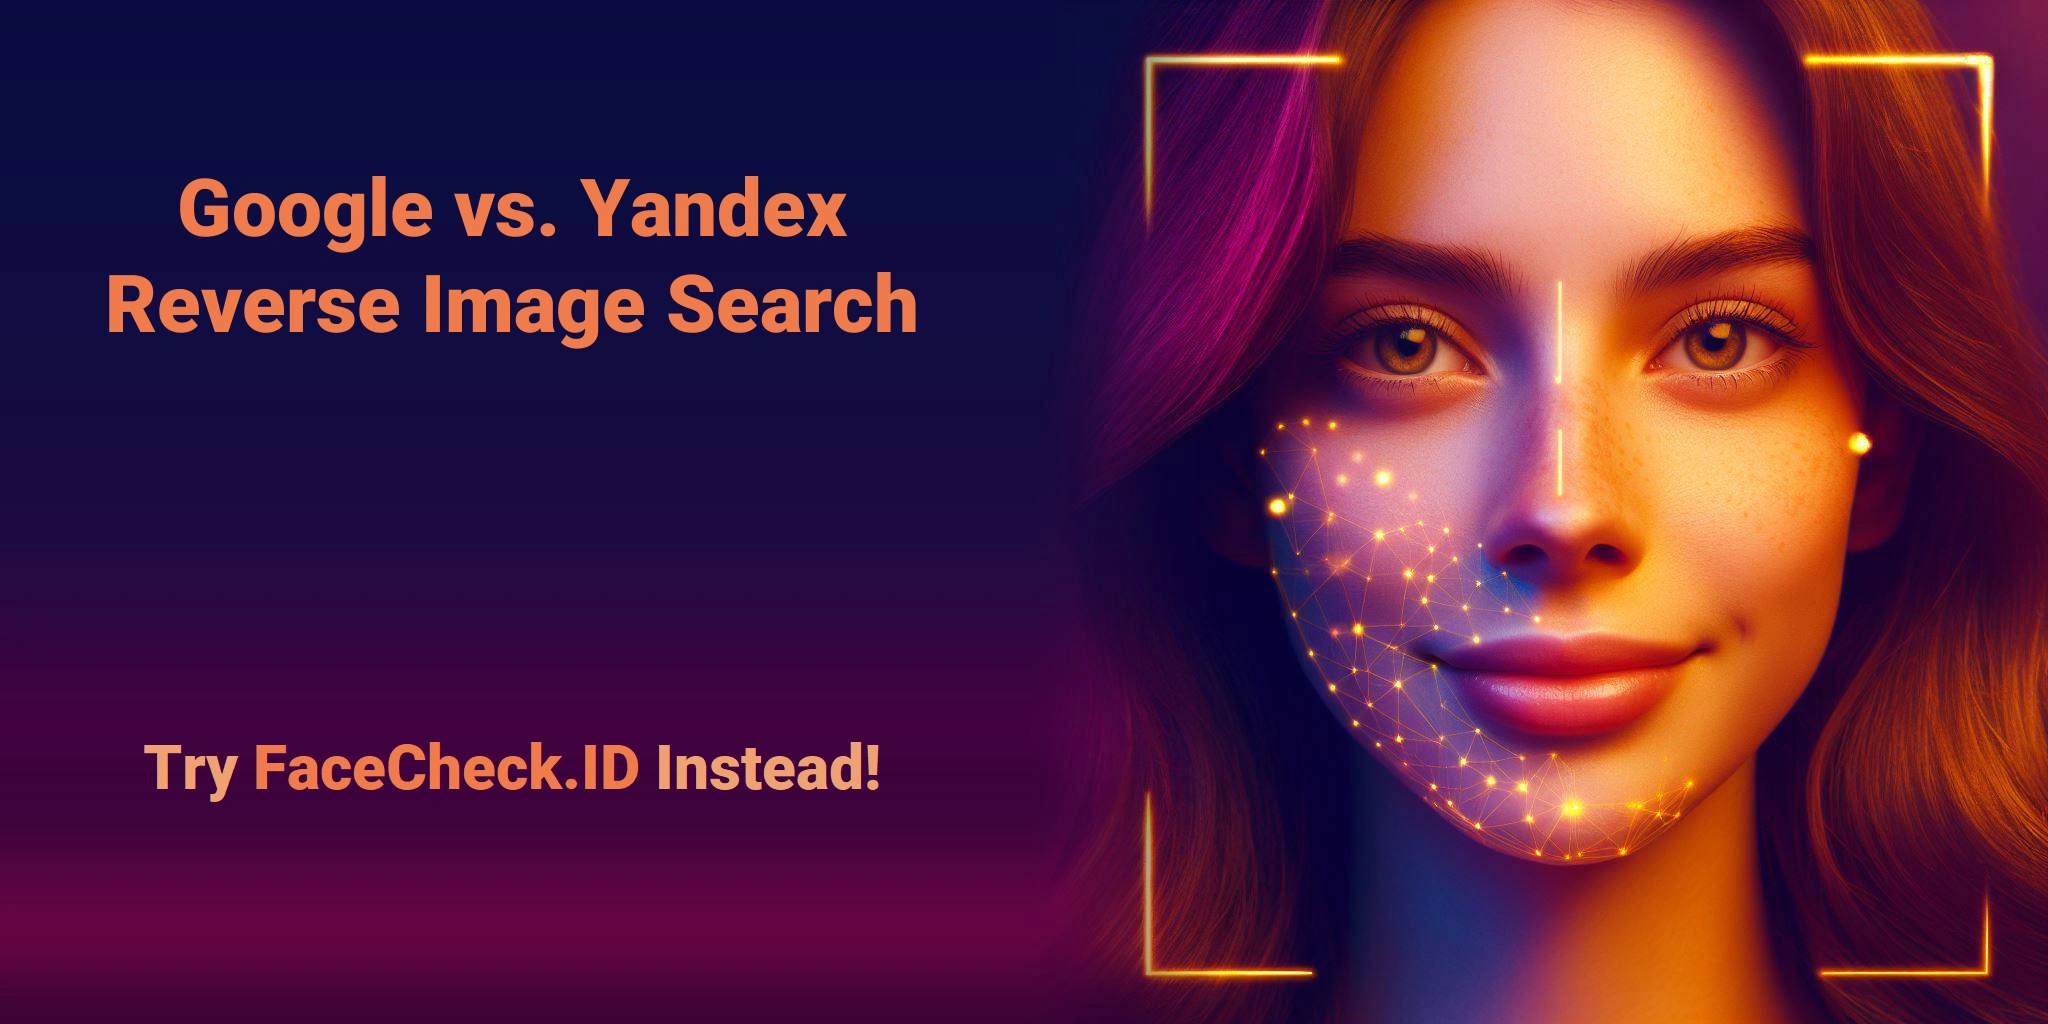 Google's Image Search vs. Yandex's Image Search: A Detailed Look